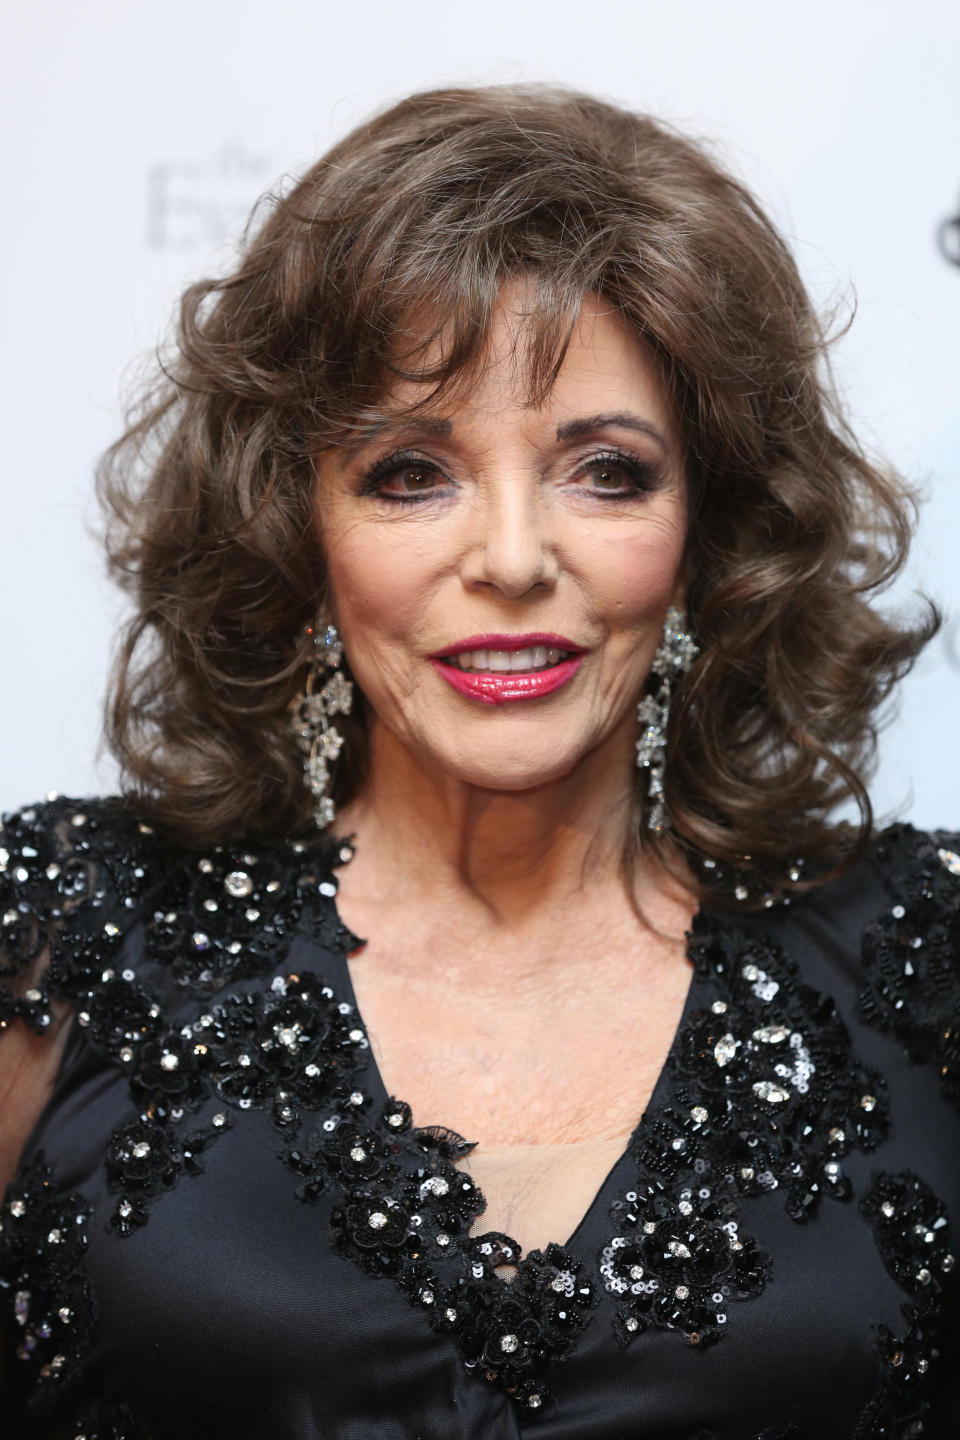 Dame Joan Collins has said she went through a ‘potential transgender moment’ when she became a ‘tomboy’ as a teenager (Isabel Infantes/PA)